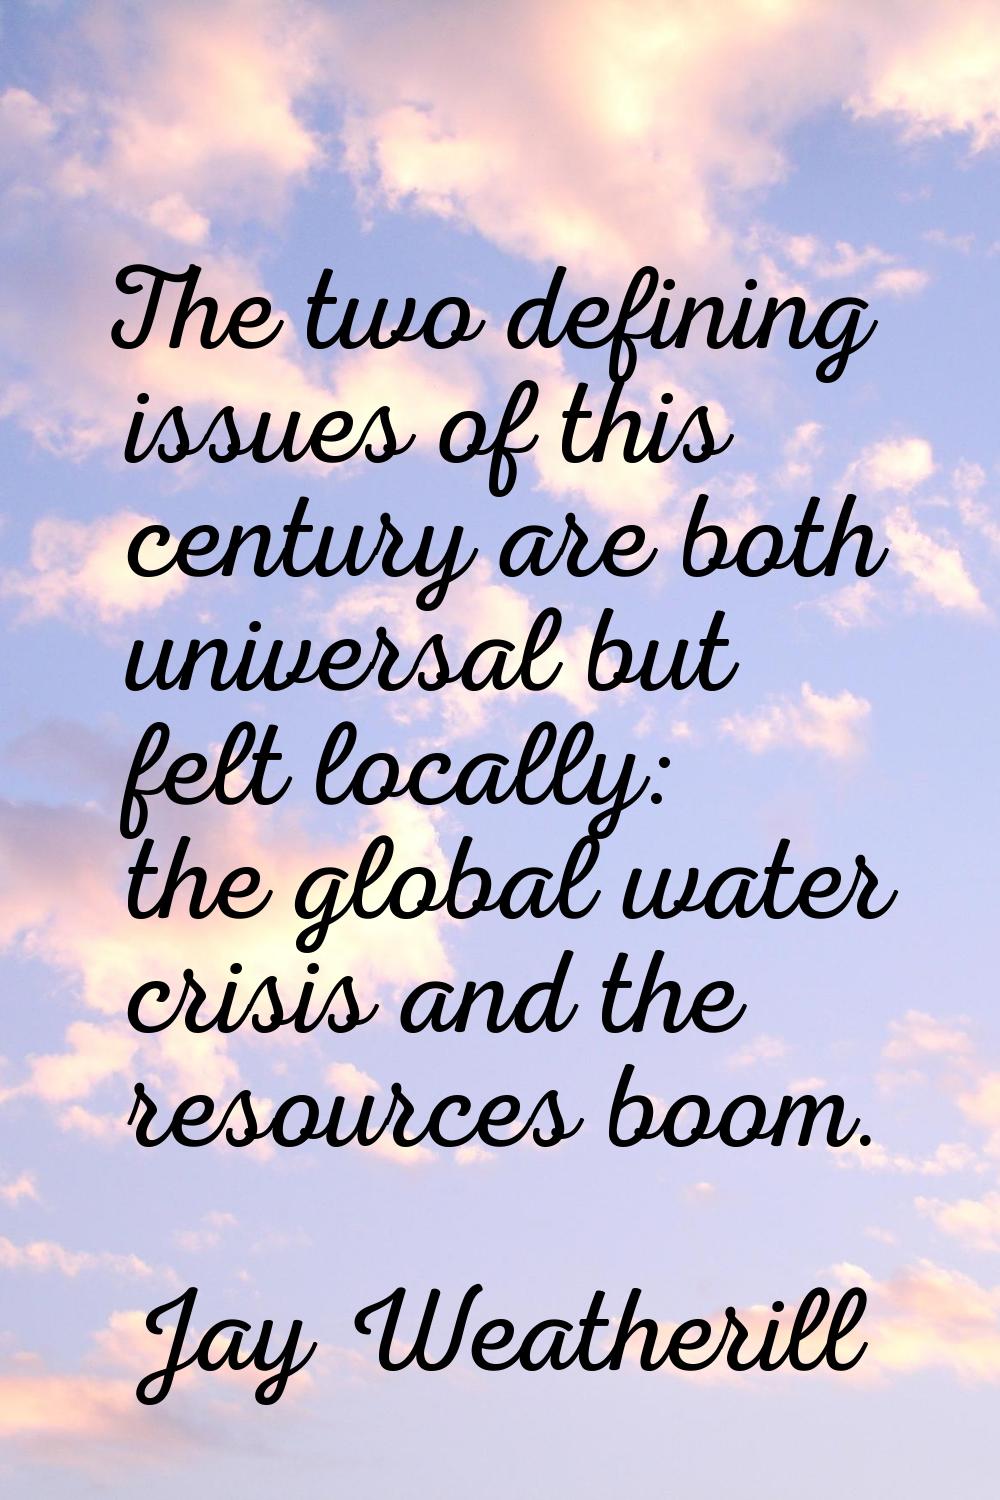 The two defining issues of this century are both universal but felt locally: the global water crisi